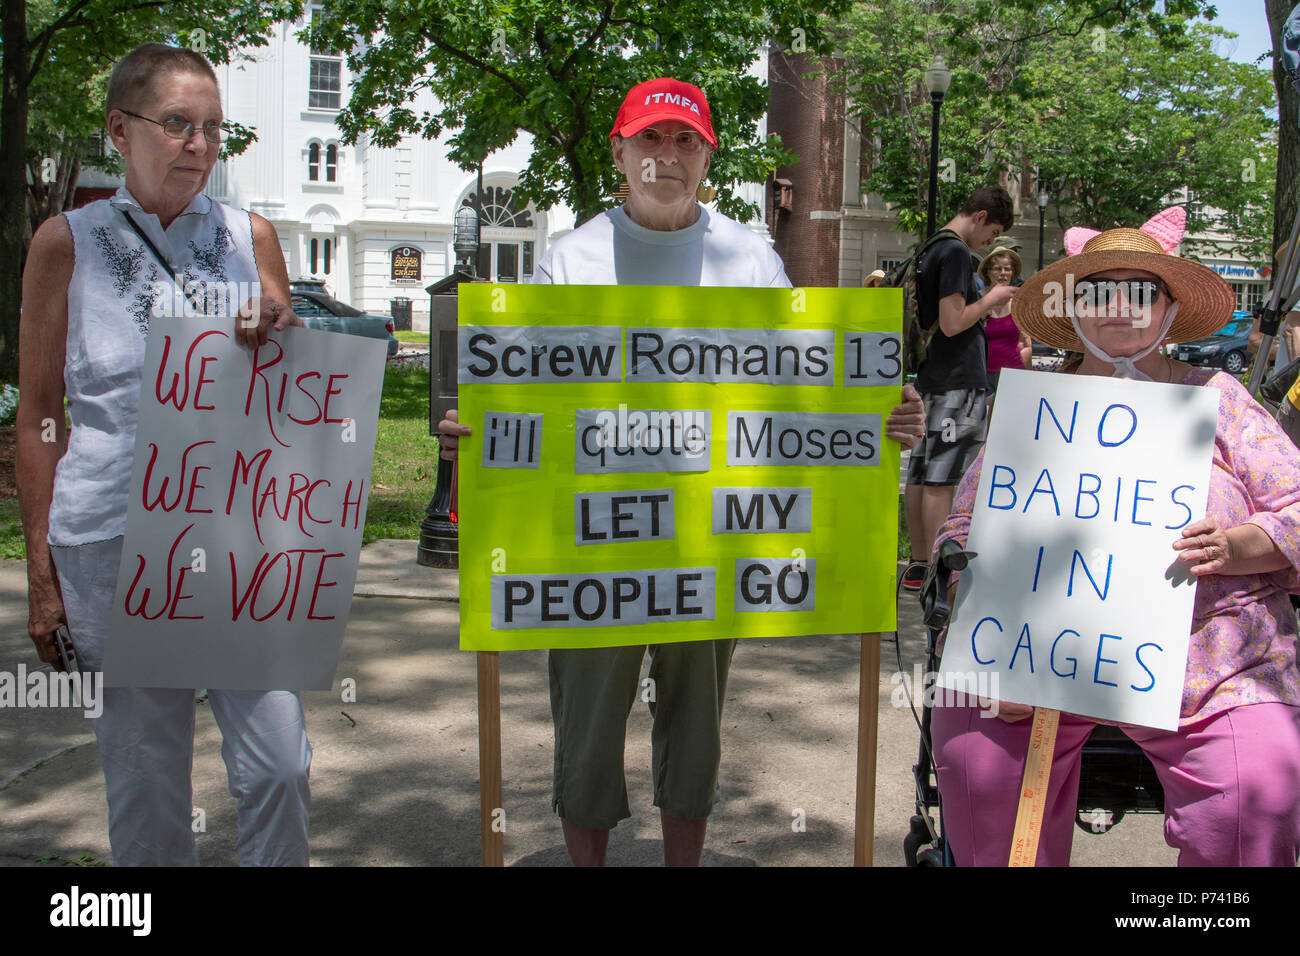 KEENE, NEW HAMPSHIRE/US - June 30 2018: Three protesters hold signs at a rally protesting the immigration policies of the Trump administration. Stock Photo